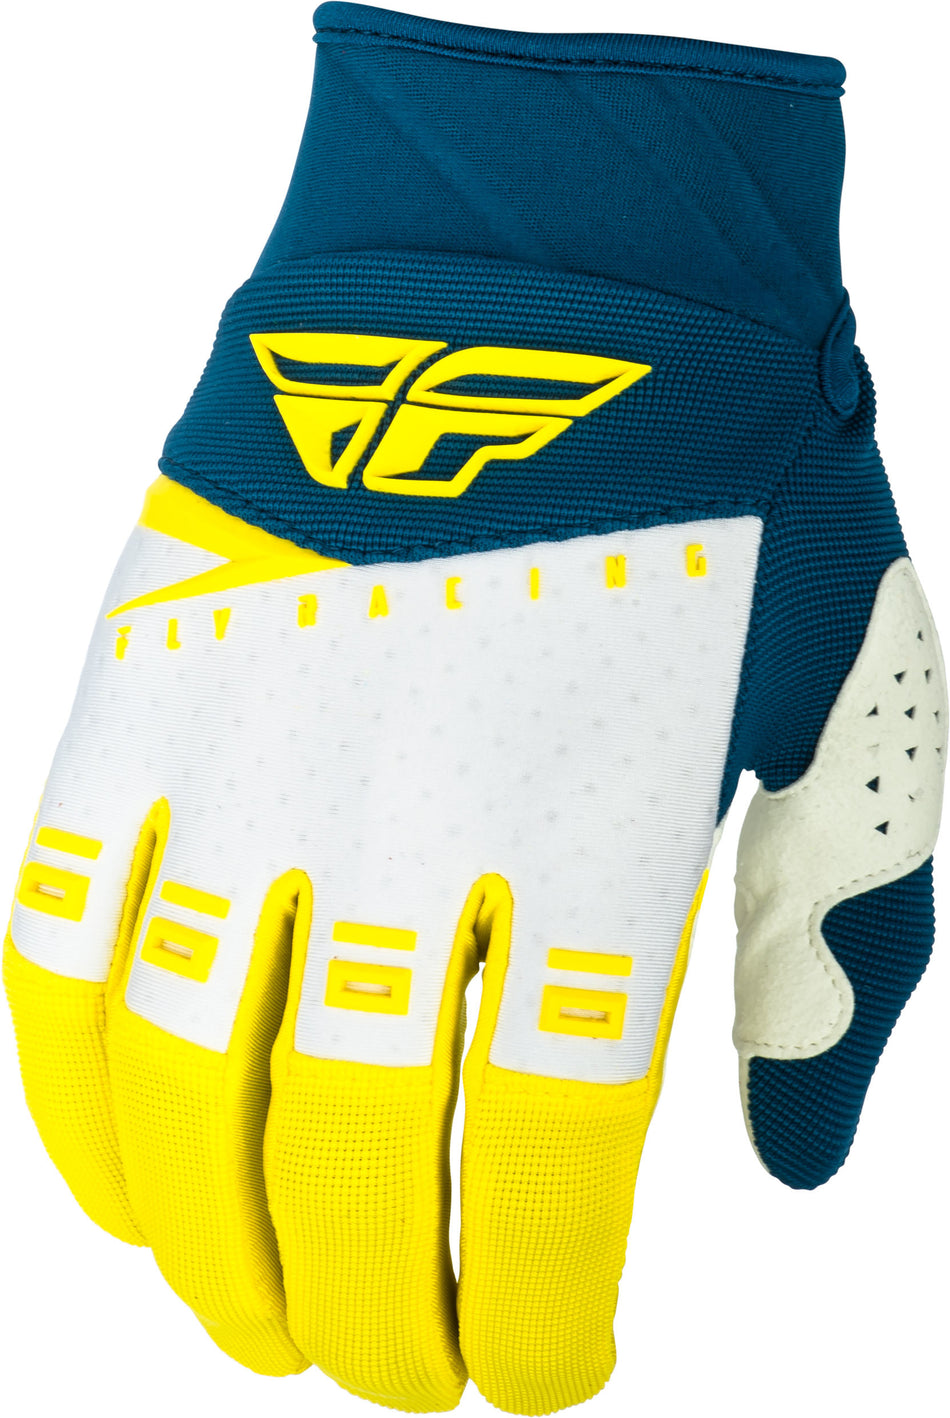 FLY RACING F-16 Gloves Yellow/White/Navy Sz 01 372-91301